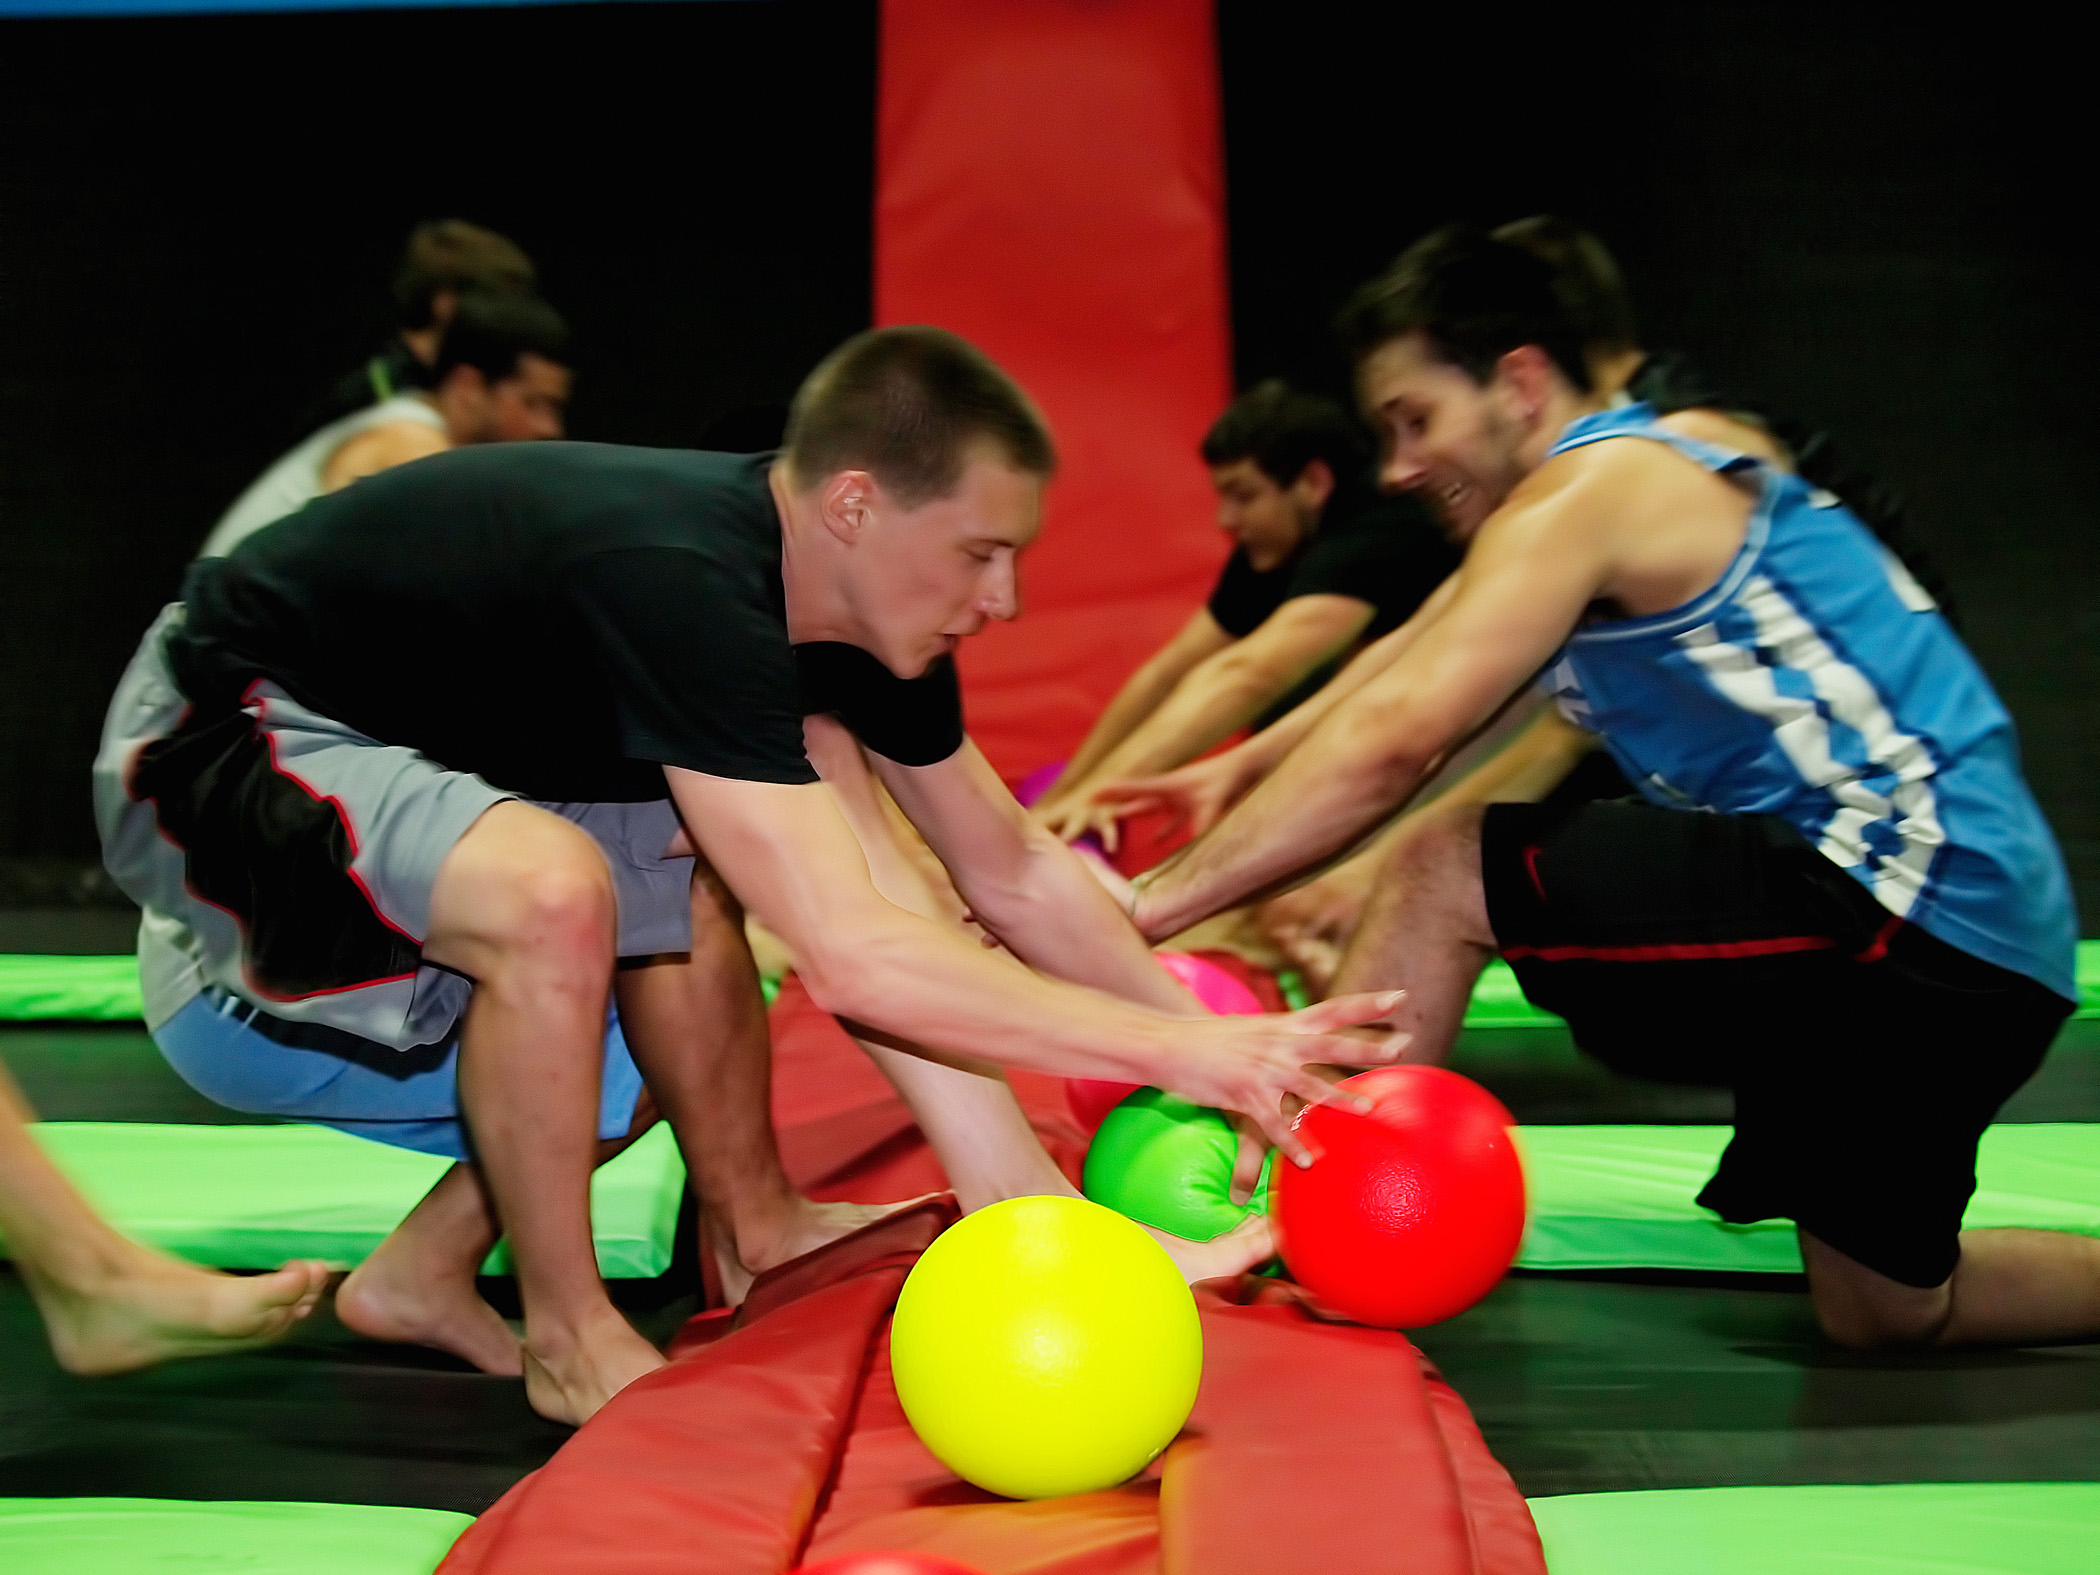 Dodgeball on the trampoline can be played all day long at Bounce! locations.